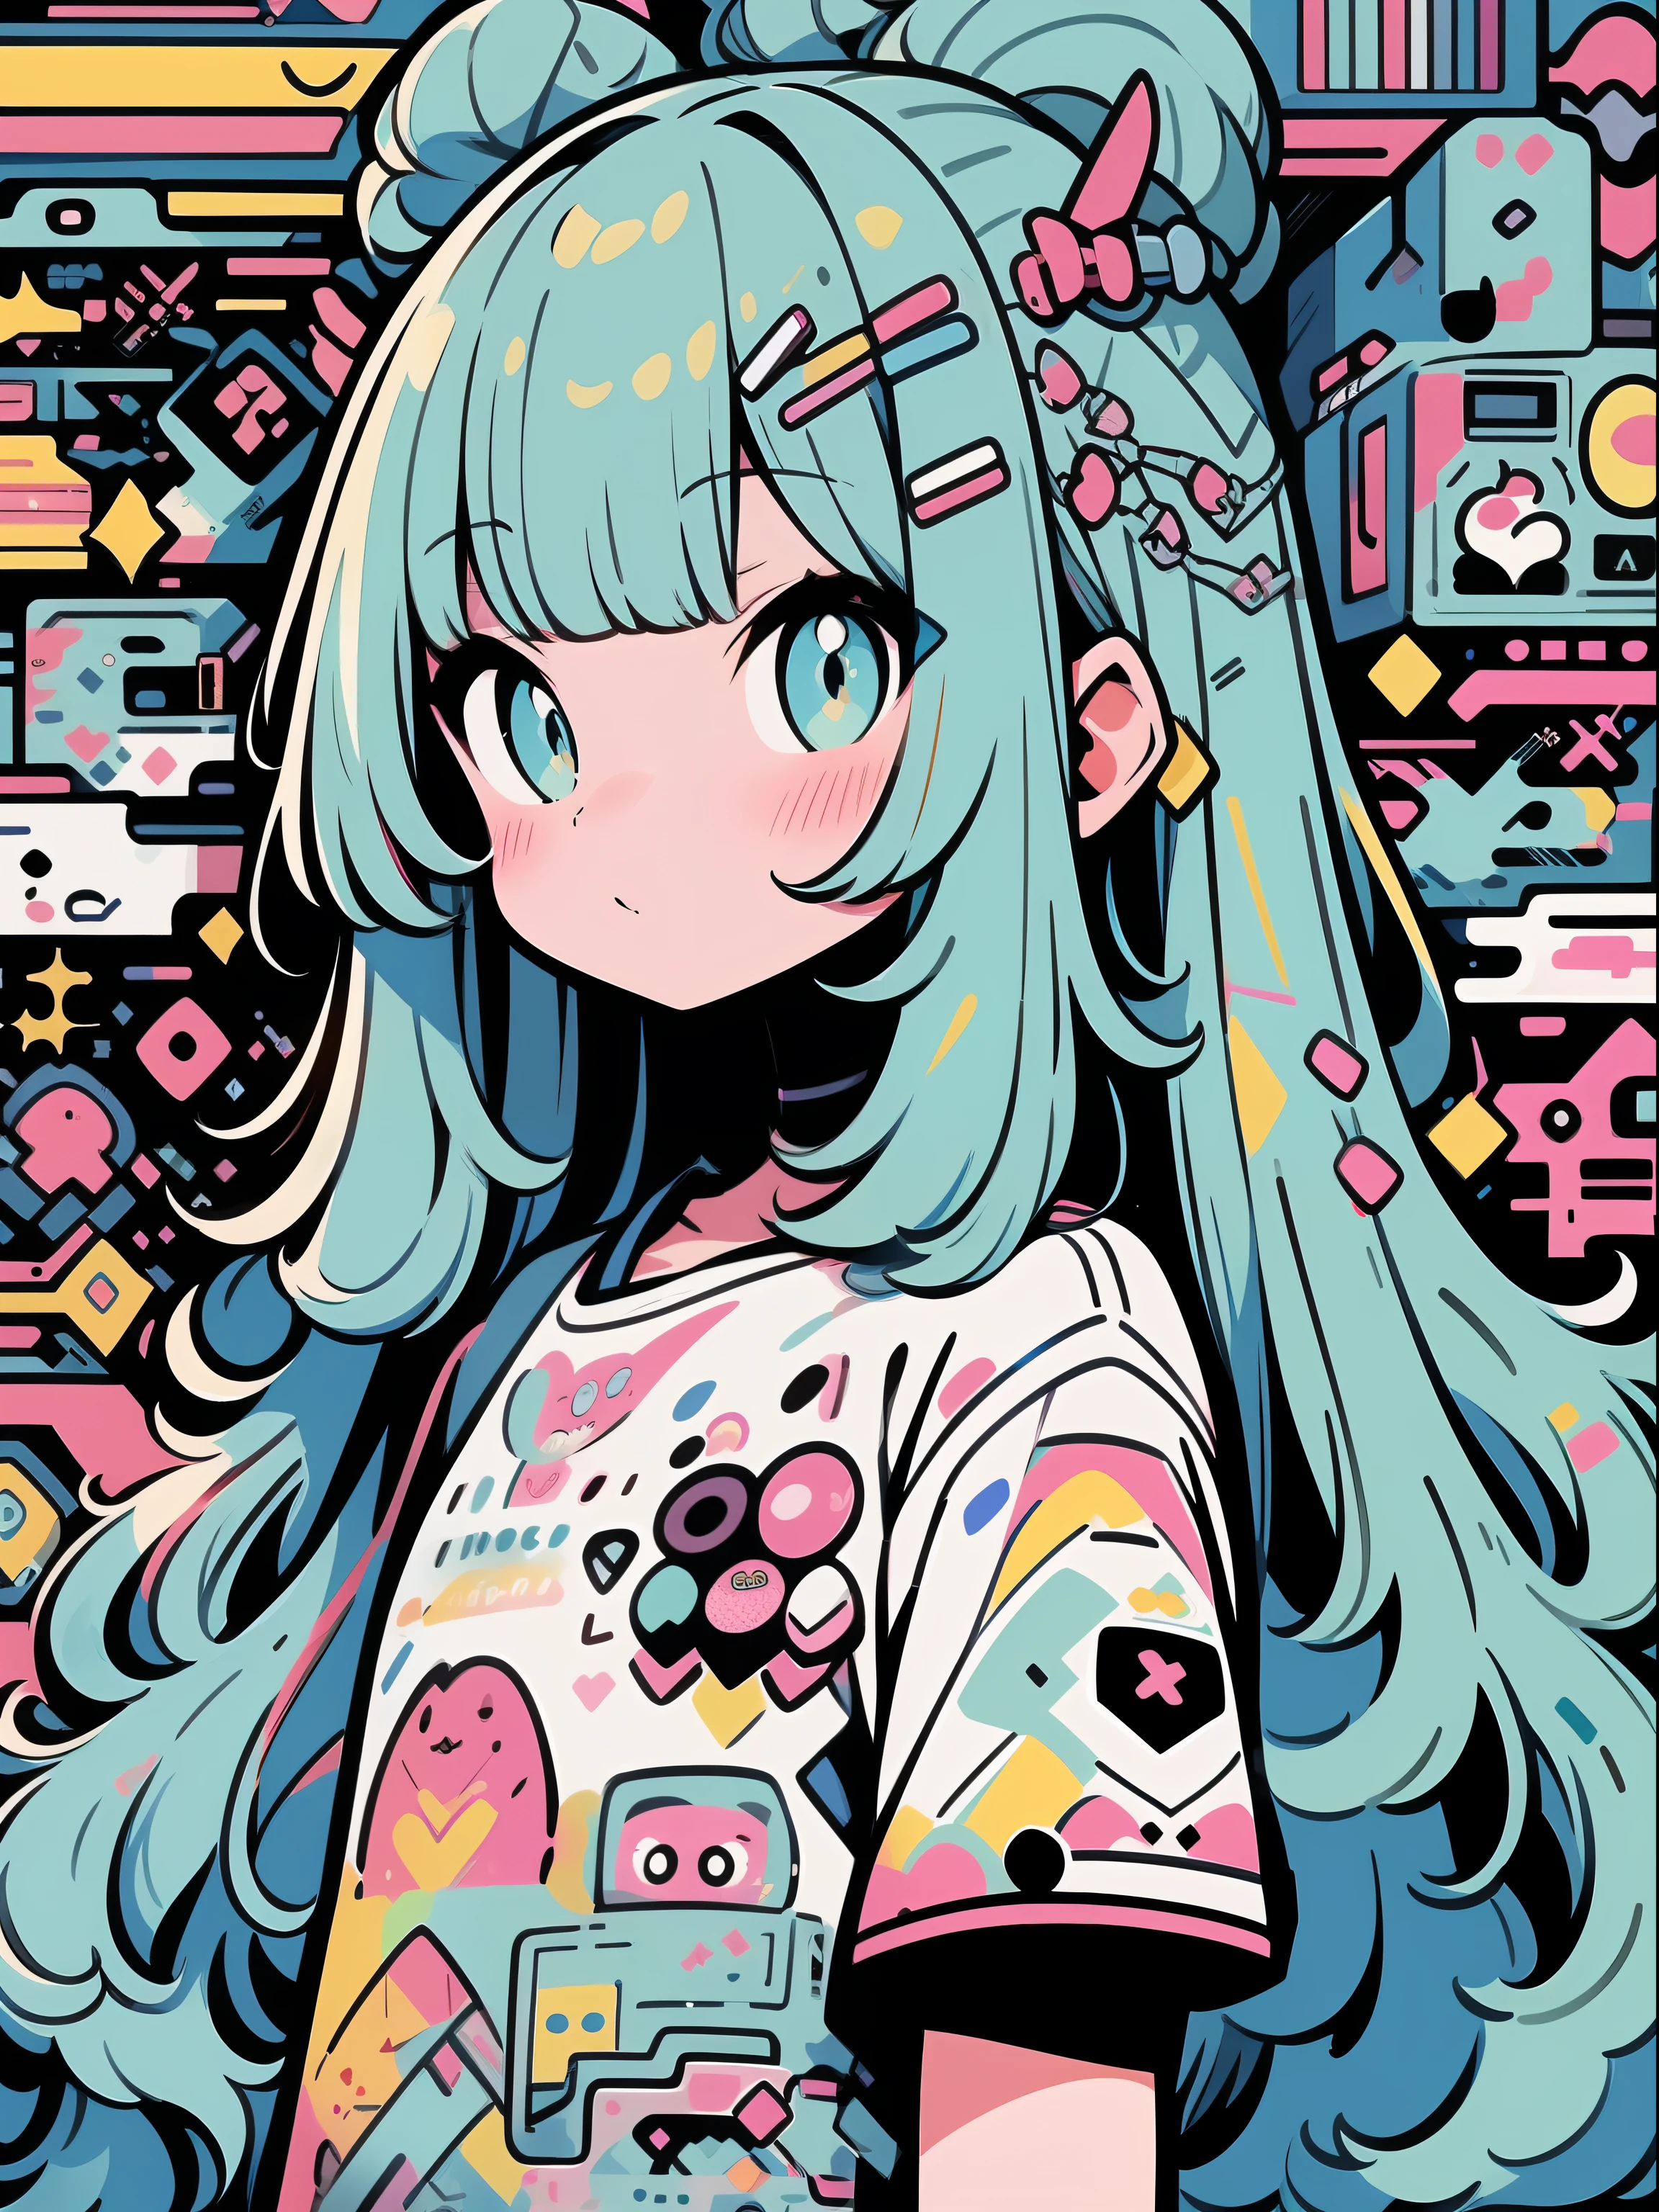 hightquality、Colorful color palette、high-level image quality、Kawaii Girl、Unprecedented amount of drawing、anime styled、Geometric pattern background、front facing、sticker style